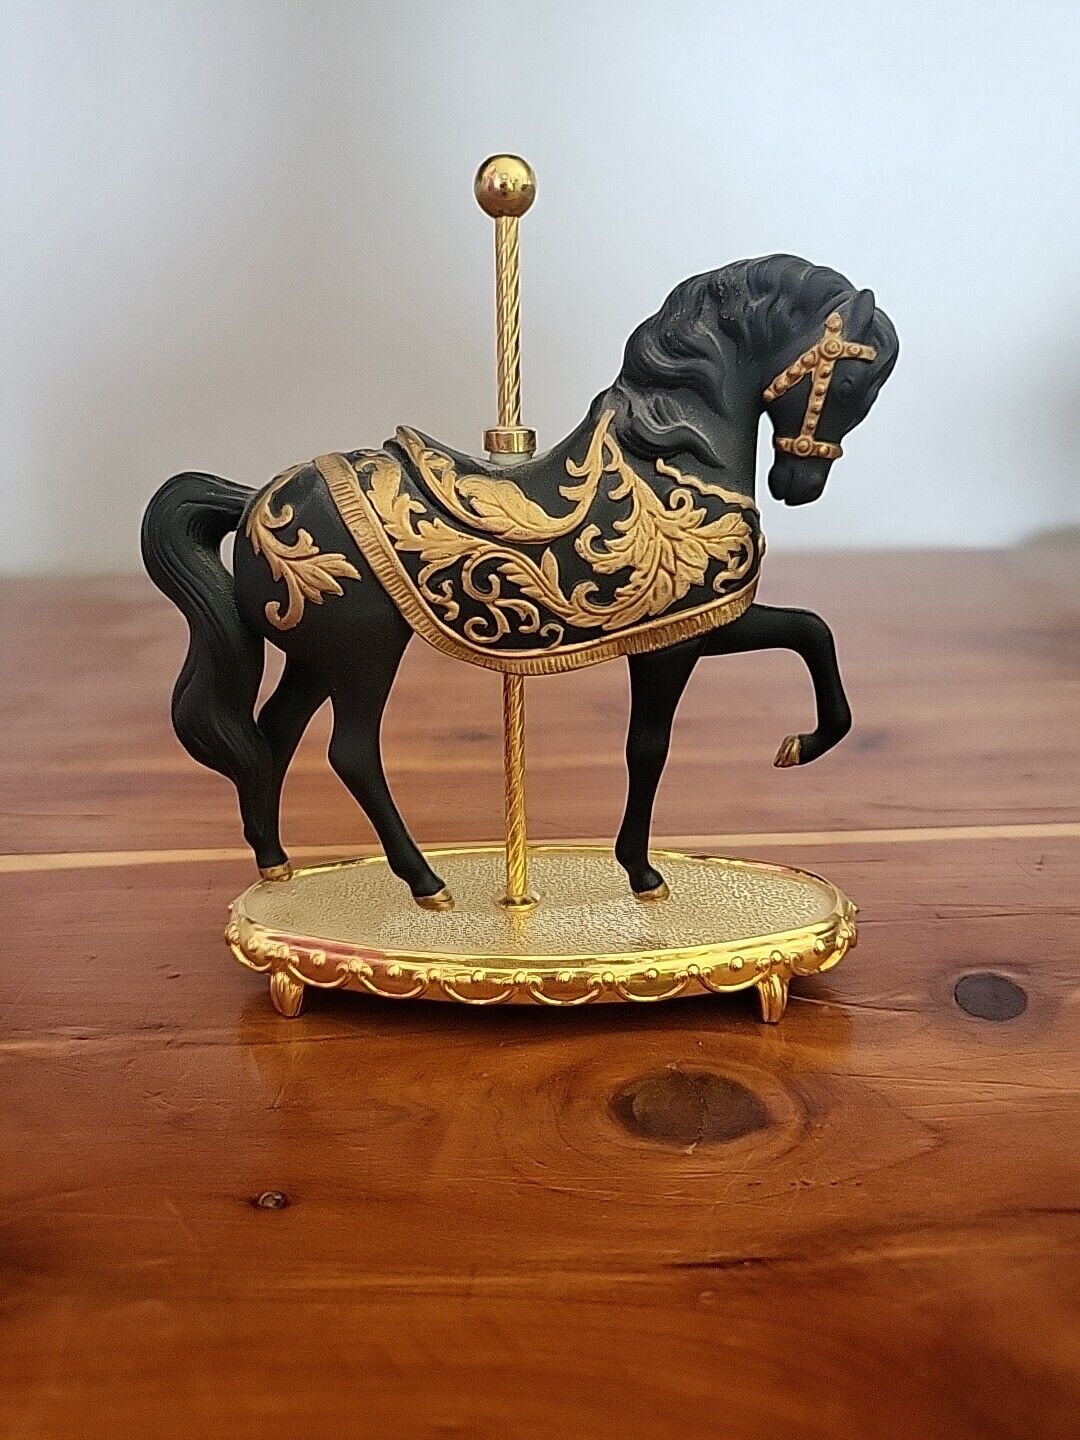 Franklin Mint Limited Carousel Horses Sculpture Collection - Black Bisque 